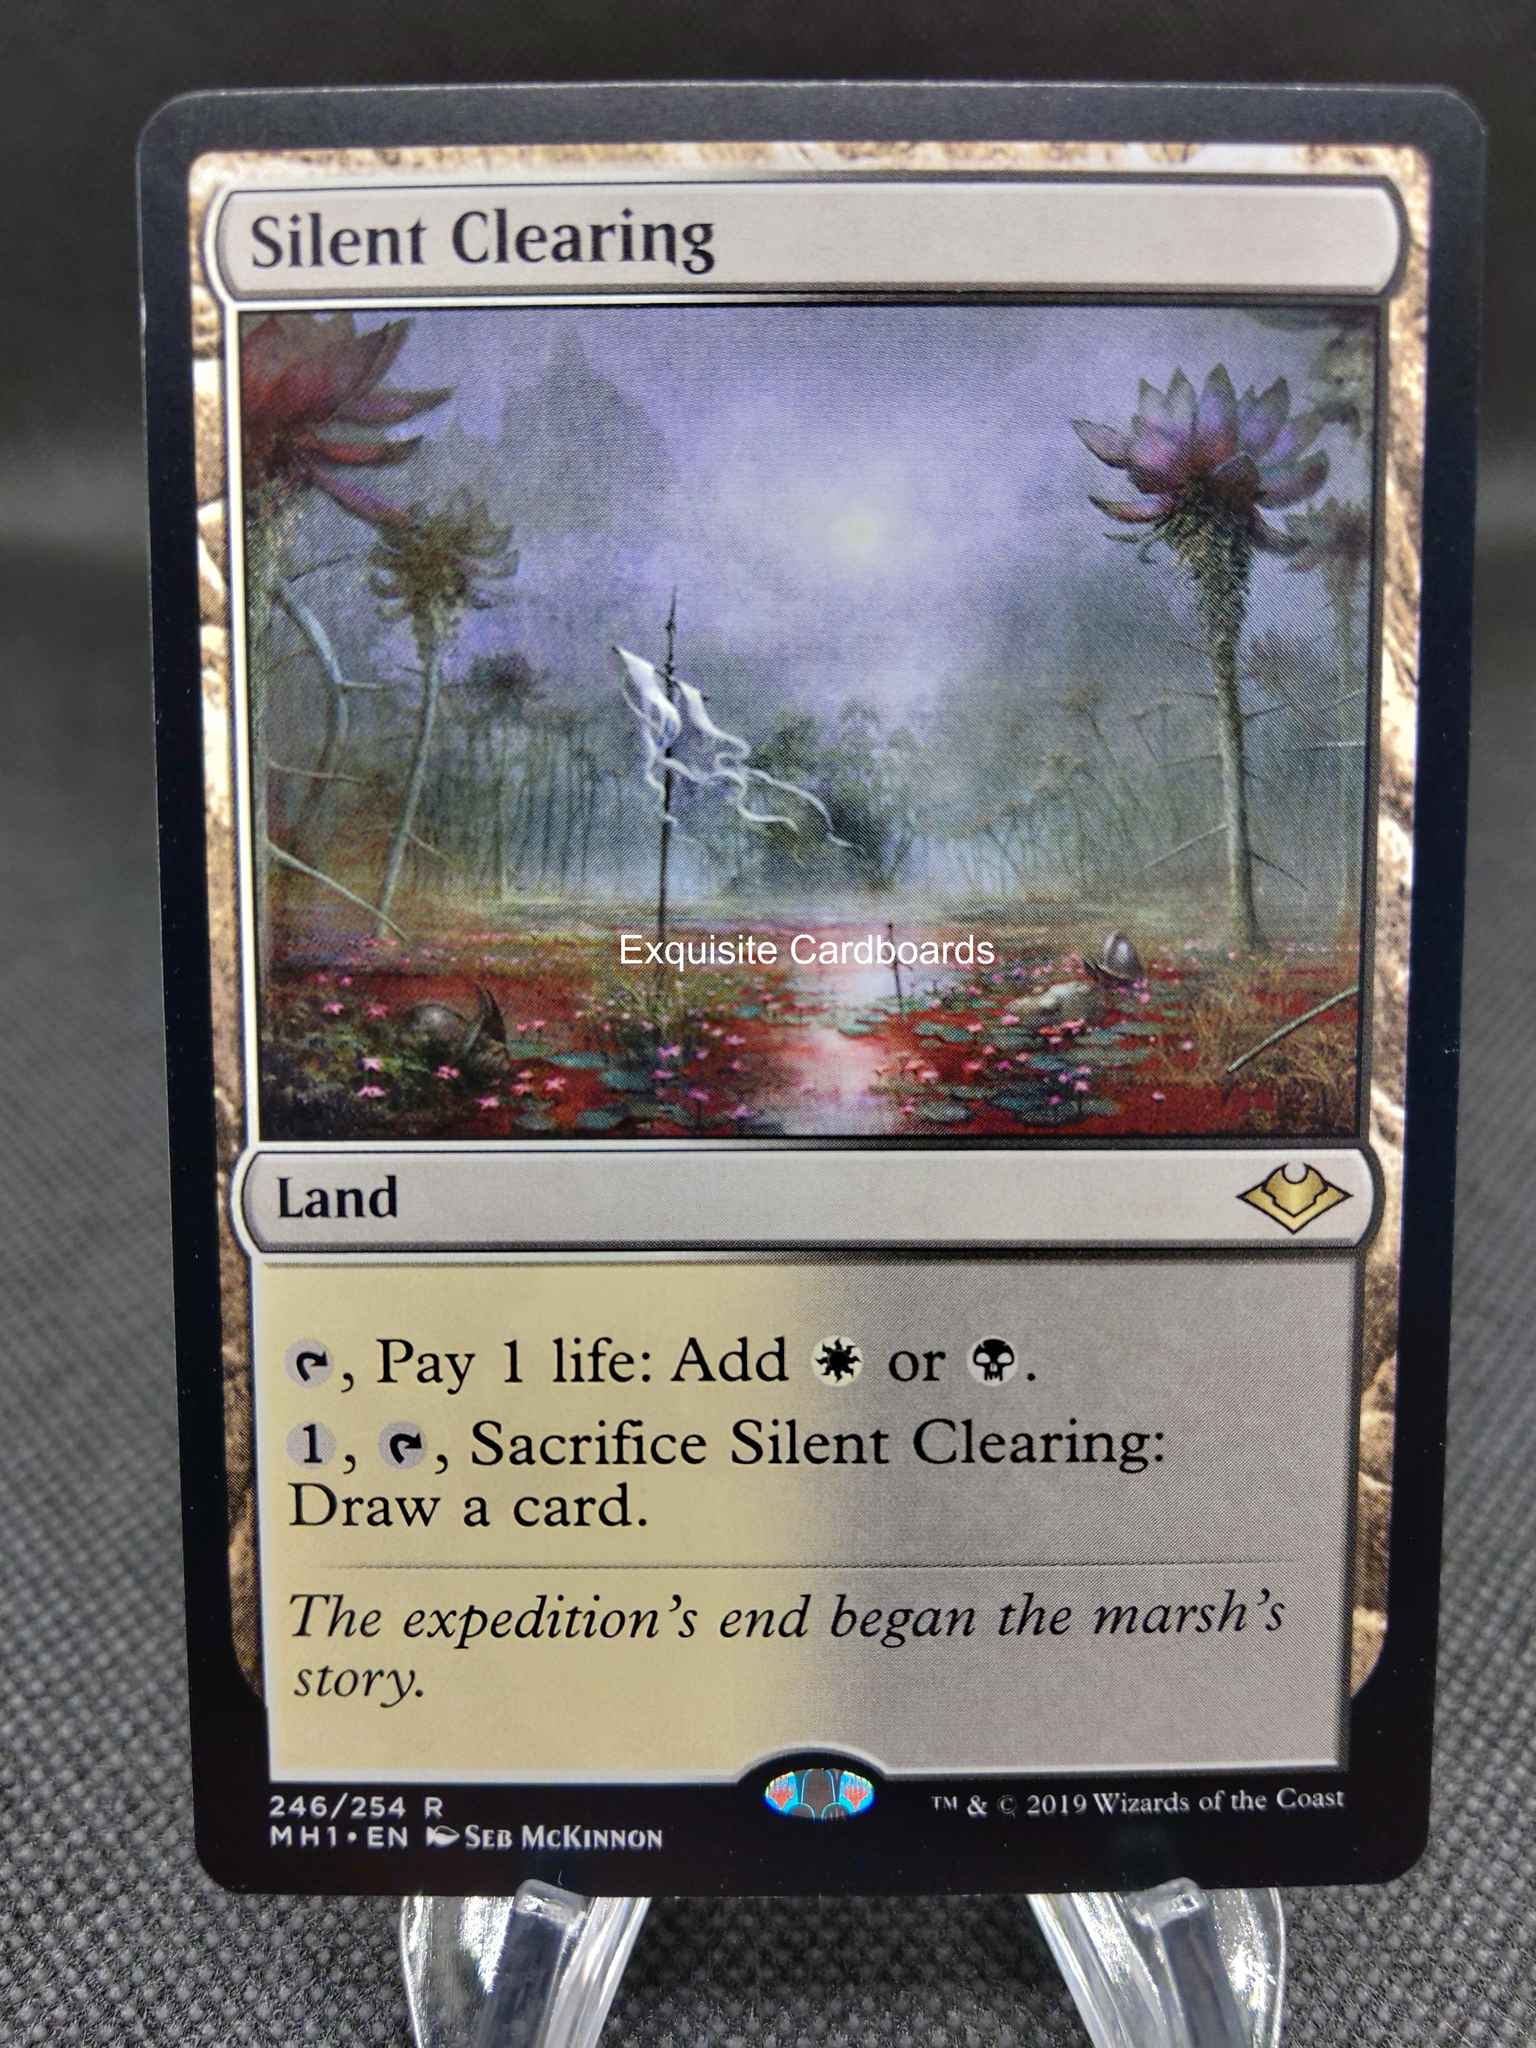 SILENT CLEARING MAGIC THE GATHERING 246//254 Modern Horizons R